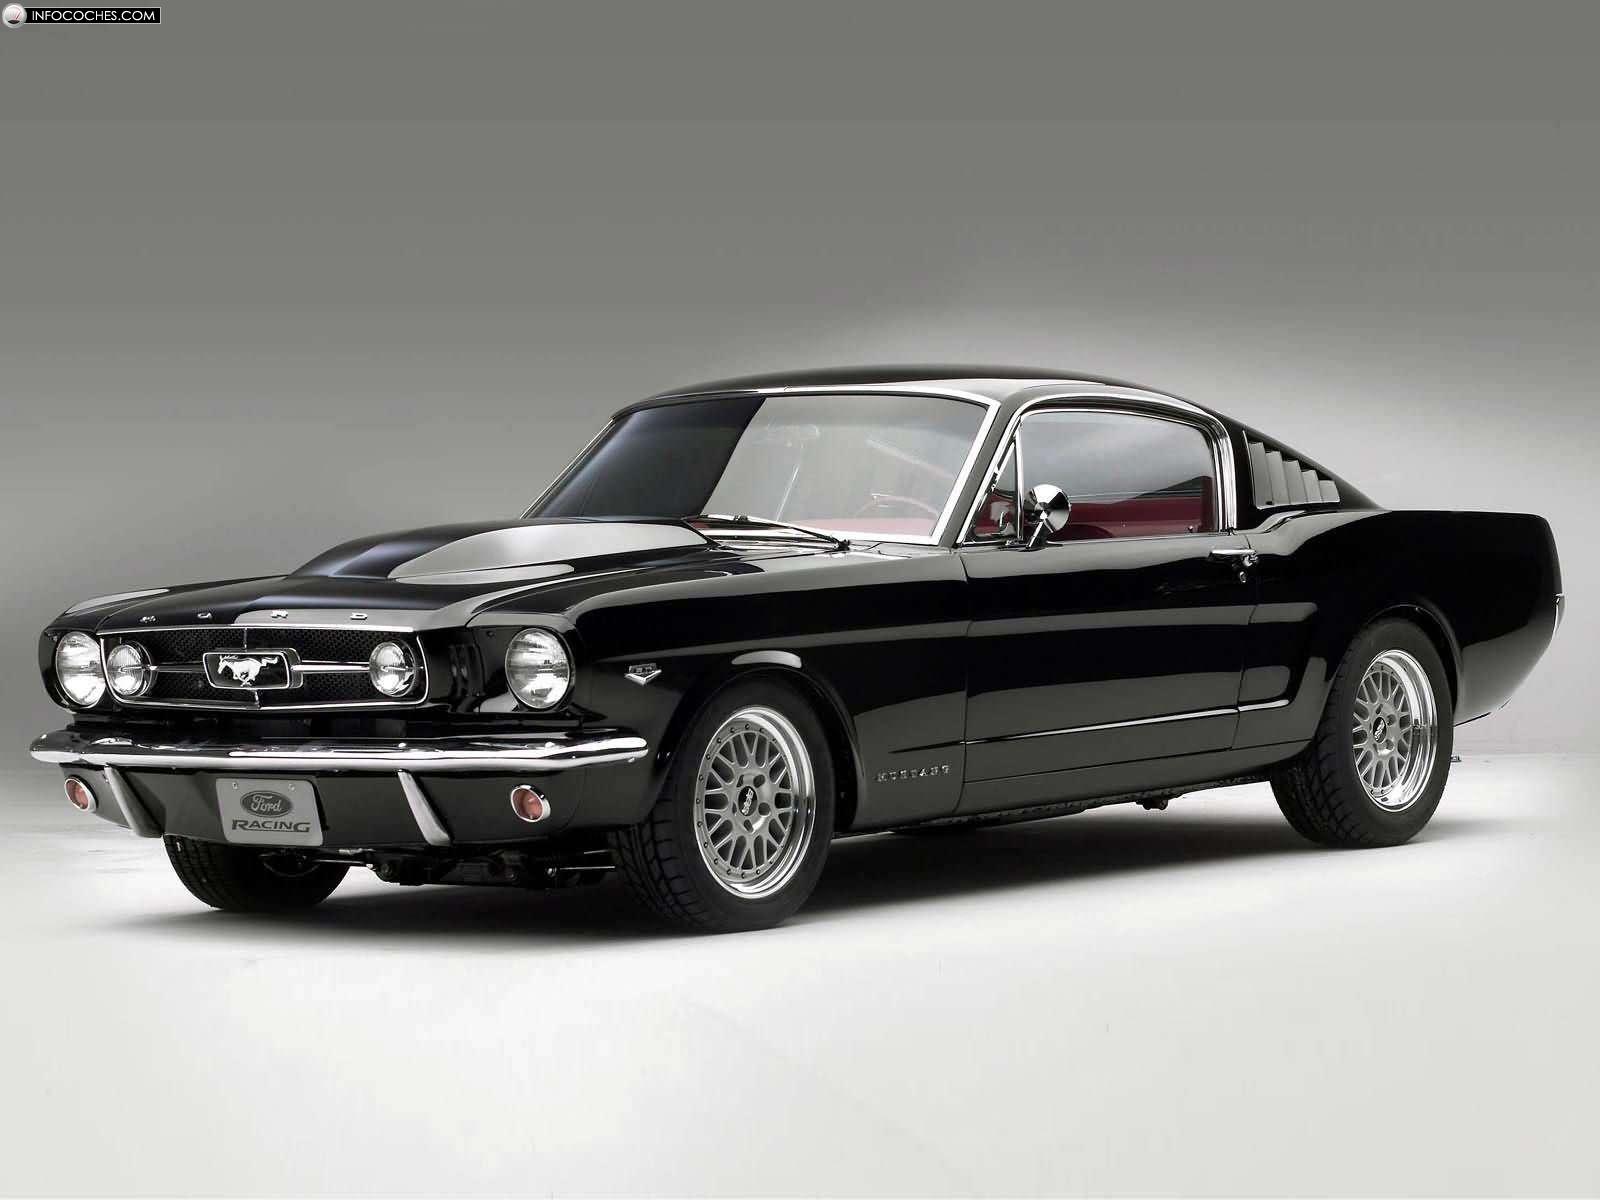 Ford_1965-Mustang_Fastback_with_Cammer_Engine-005_4.jpg